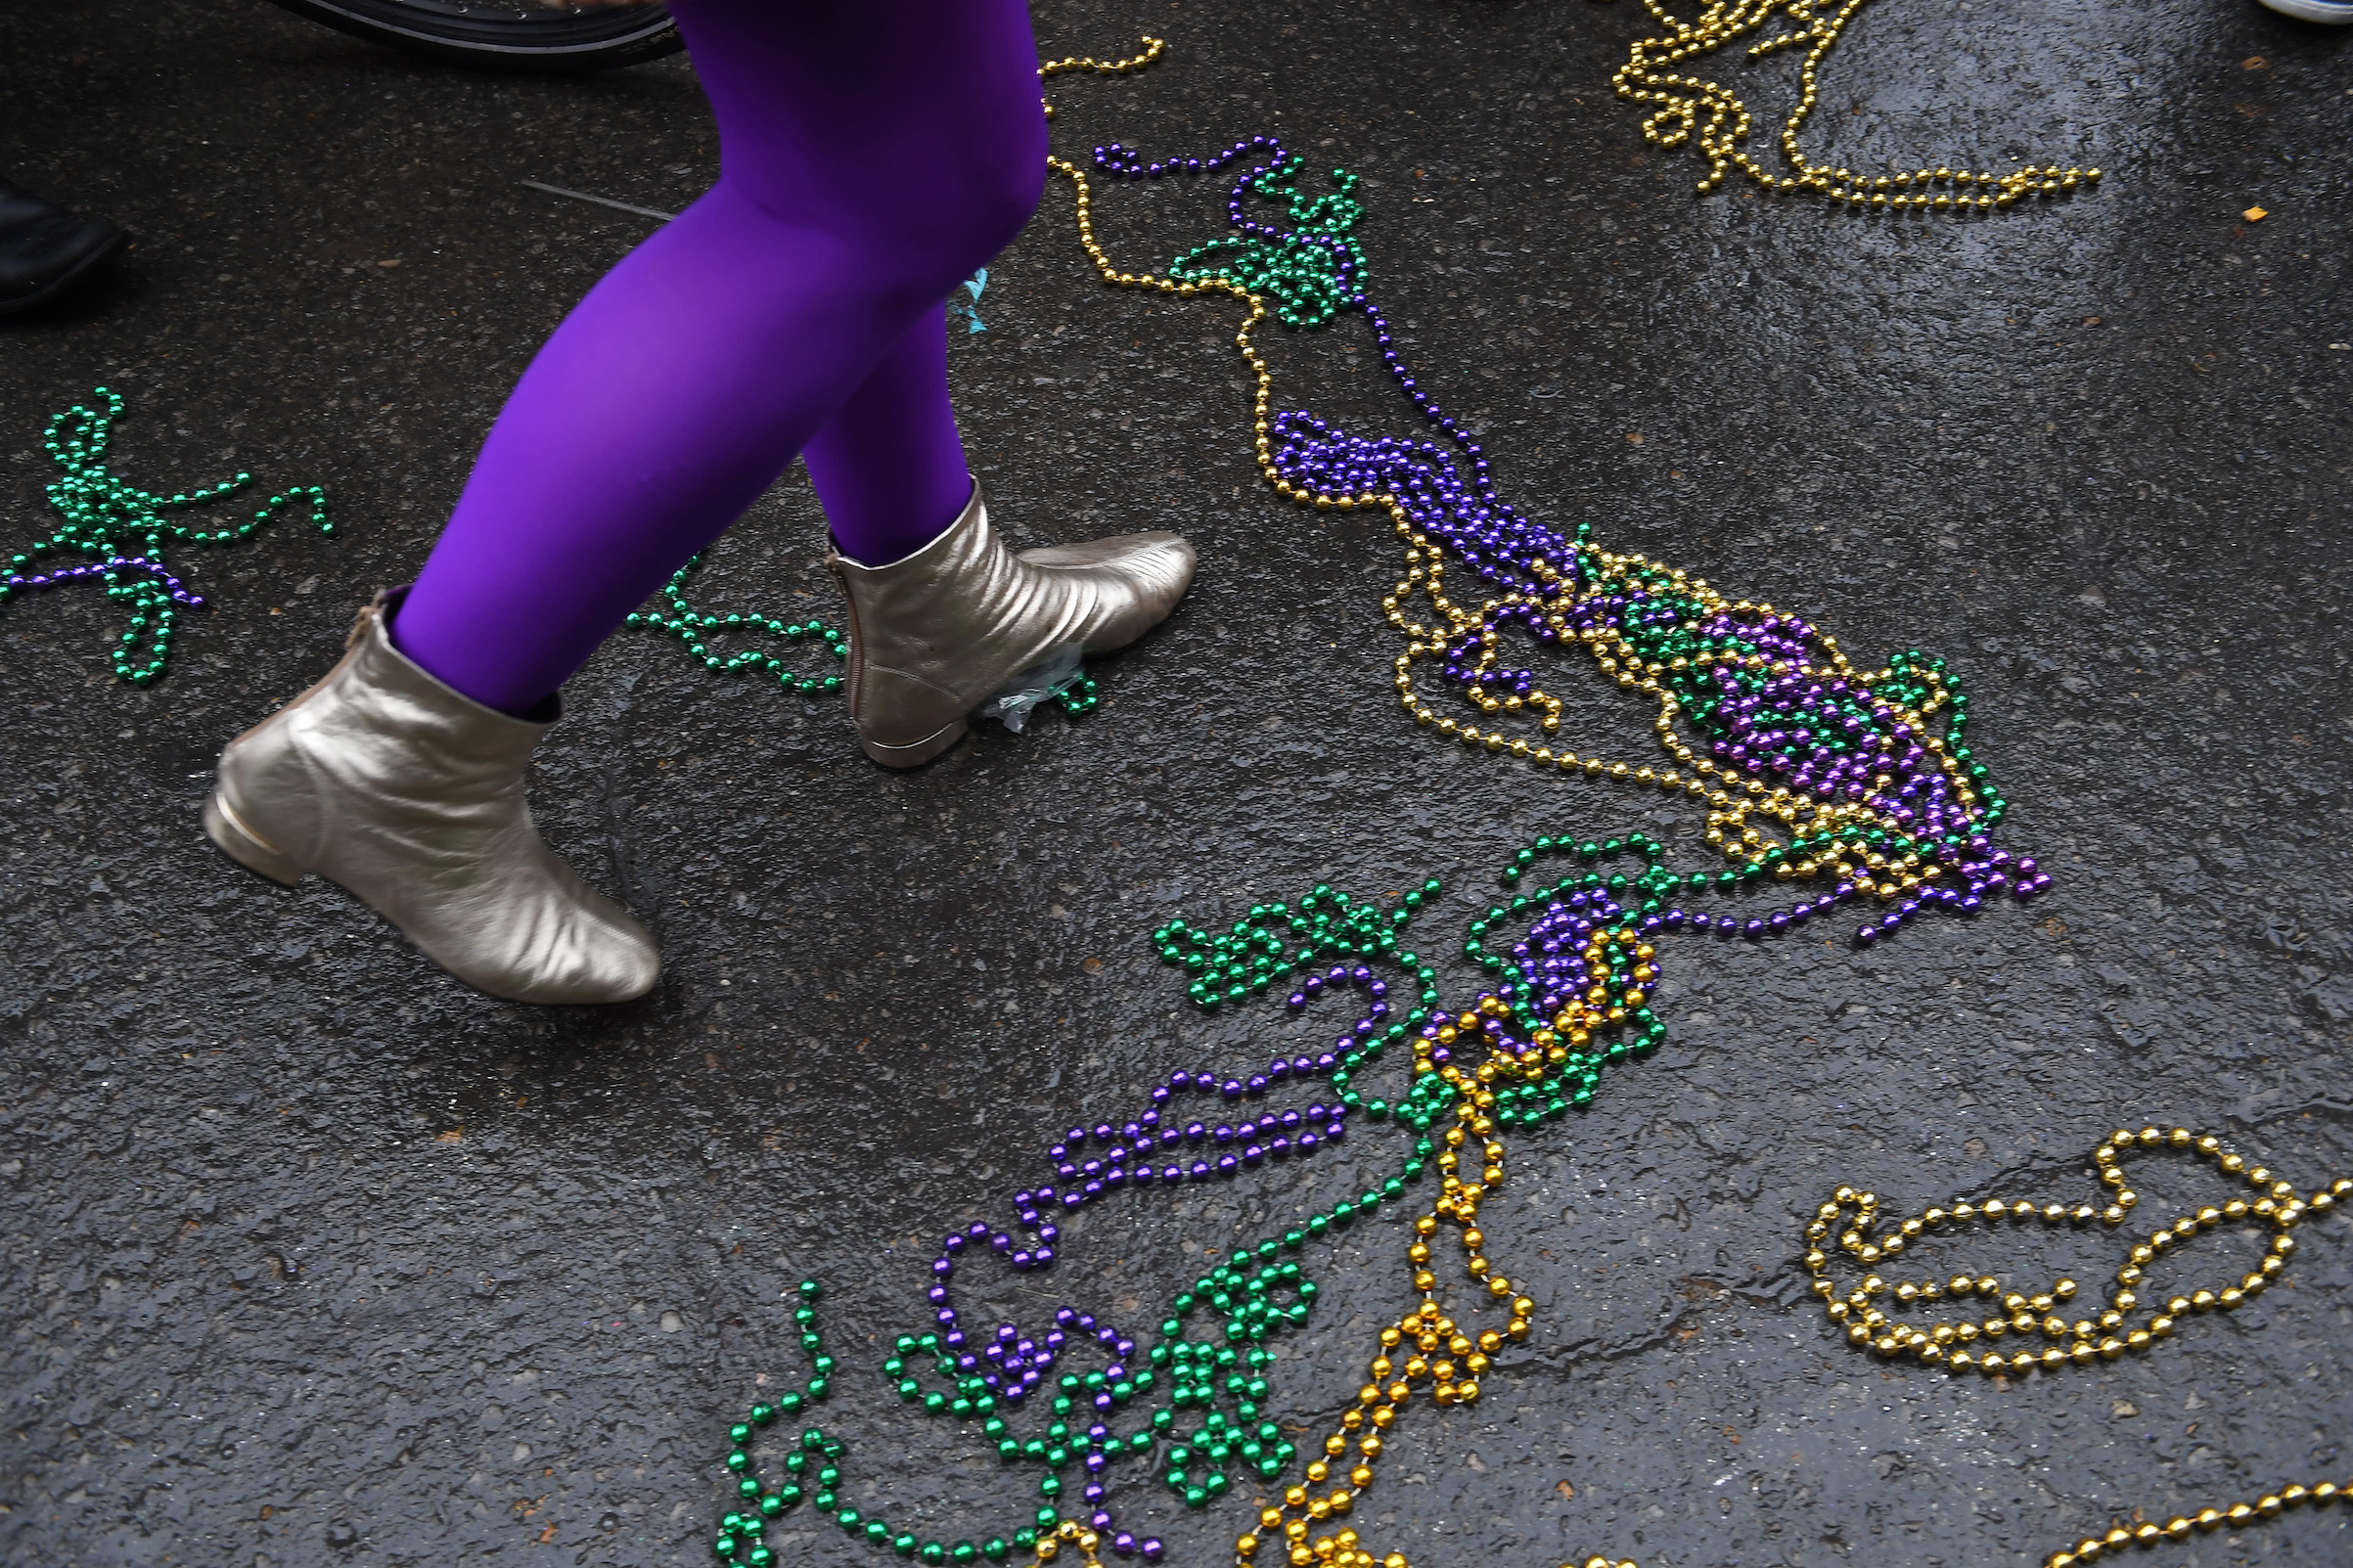 A person walks among beads during a parade on Feb. 17, 2017, in New Orleans. (The Washington Post / Getty Images)